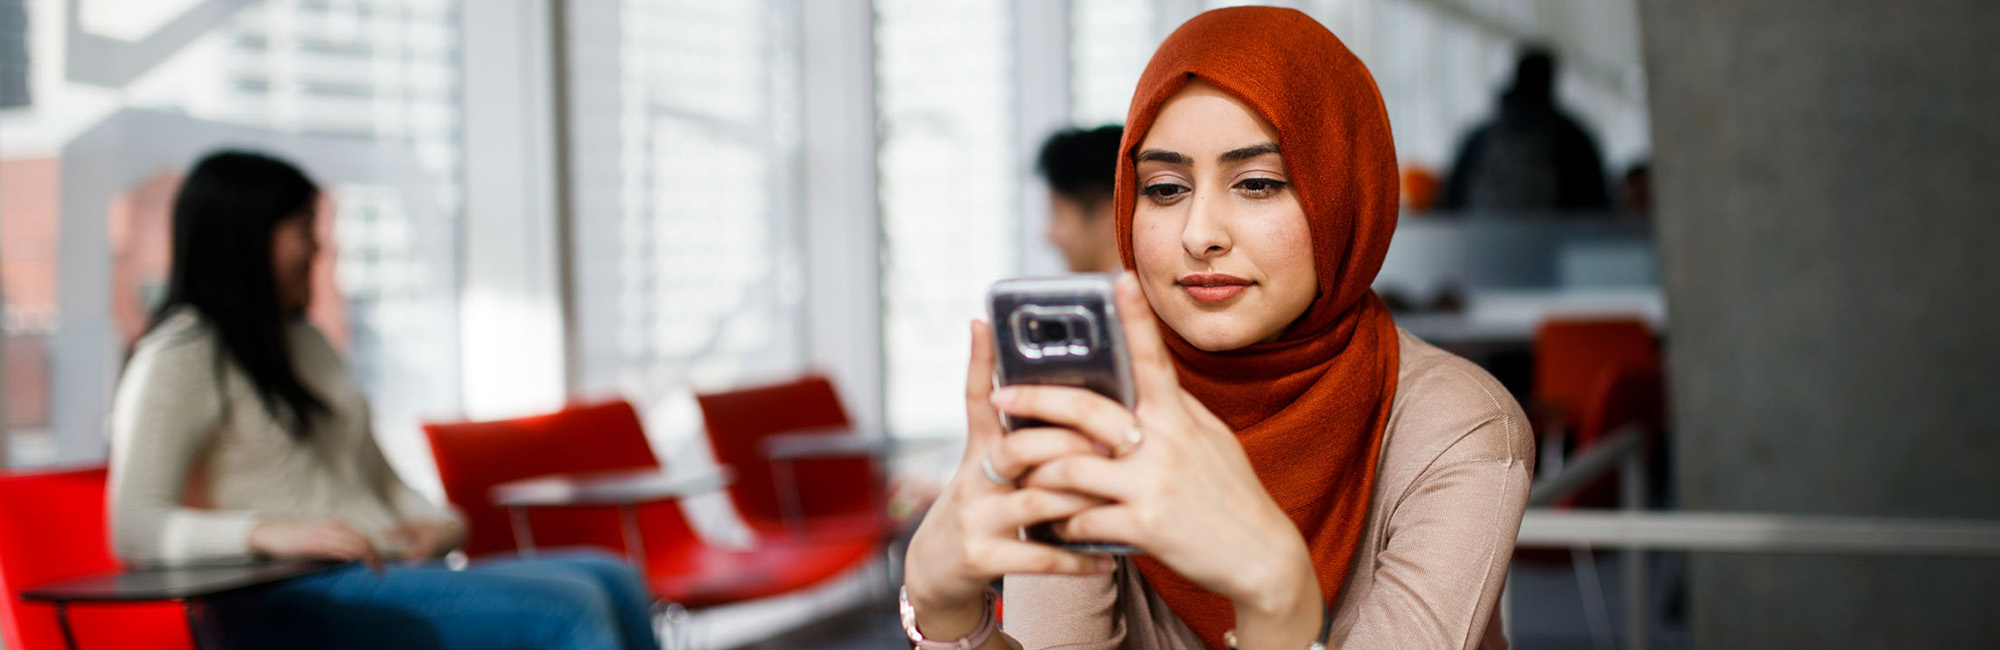 Ryerson student in a hijab contacting Human Rights Services.